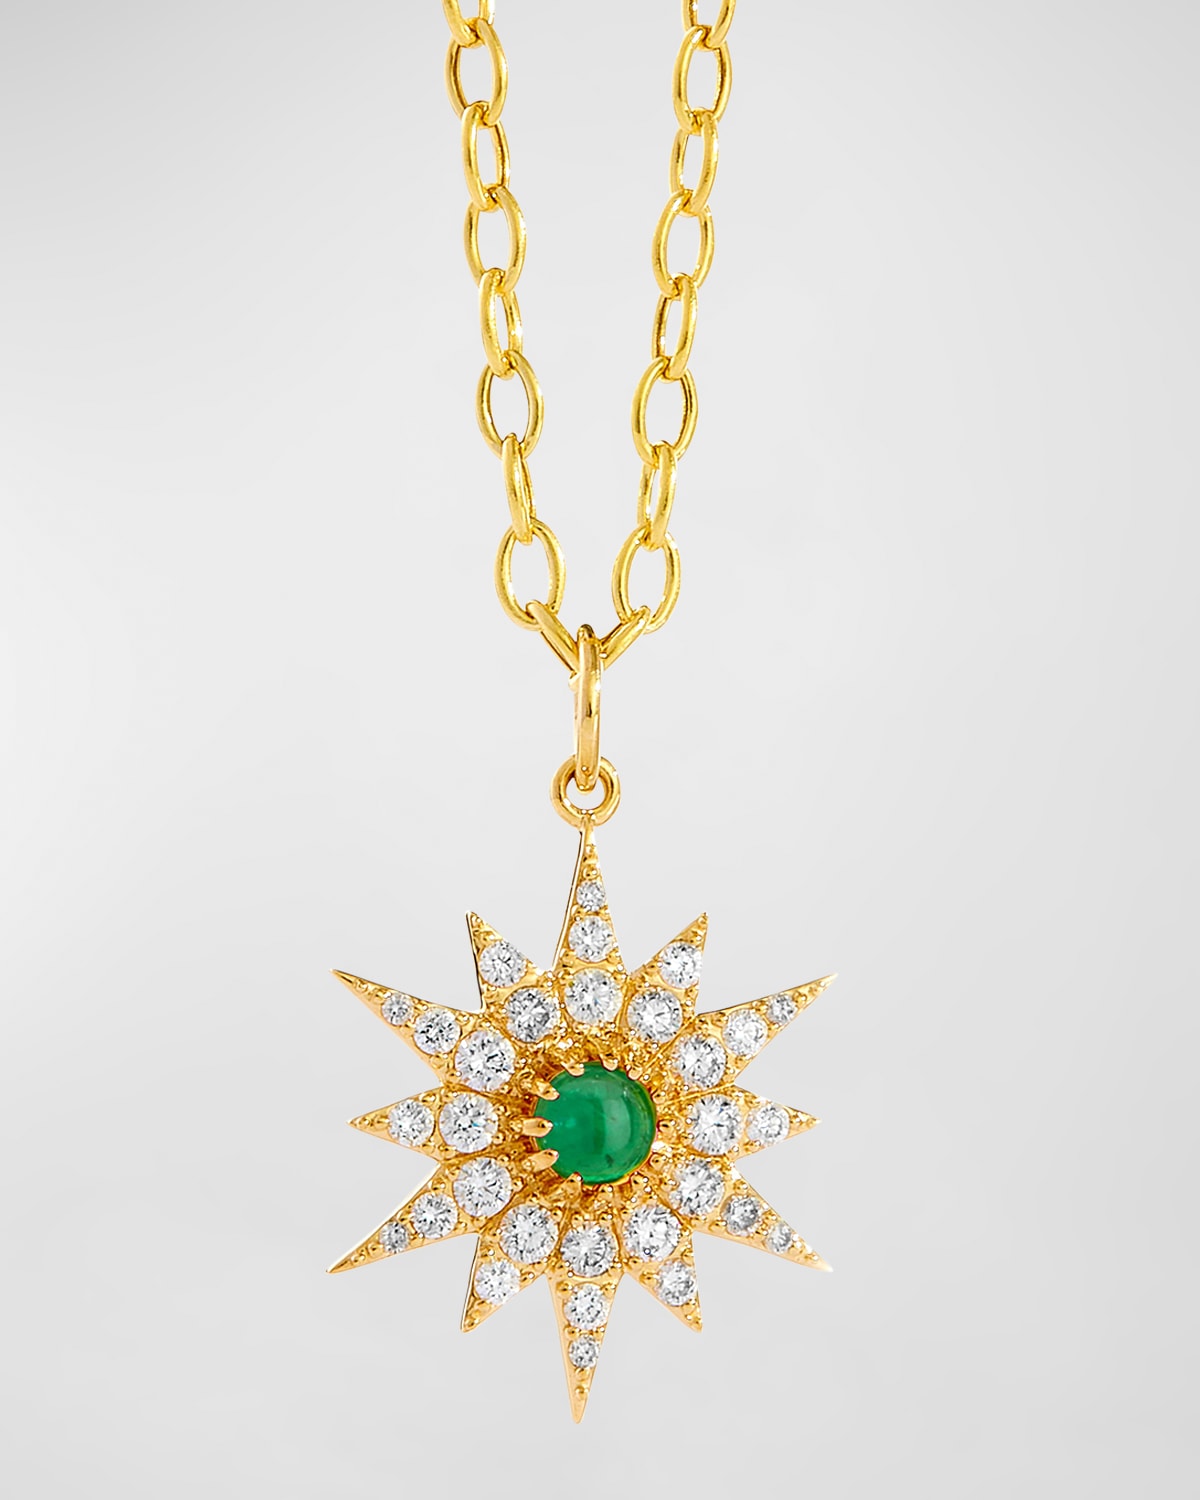 SYNA 18K YELLOW GOLD COSMIC STARBURST PENDANT NECKLACE WITH EMERALD AND DIAMONDS